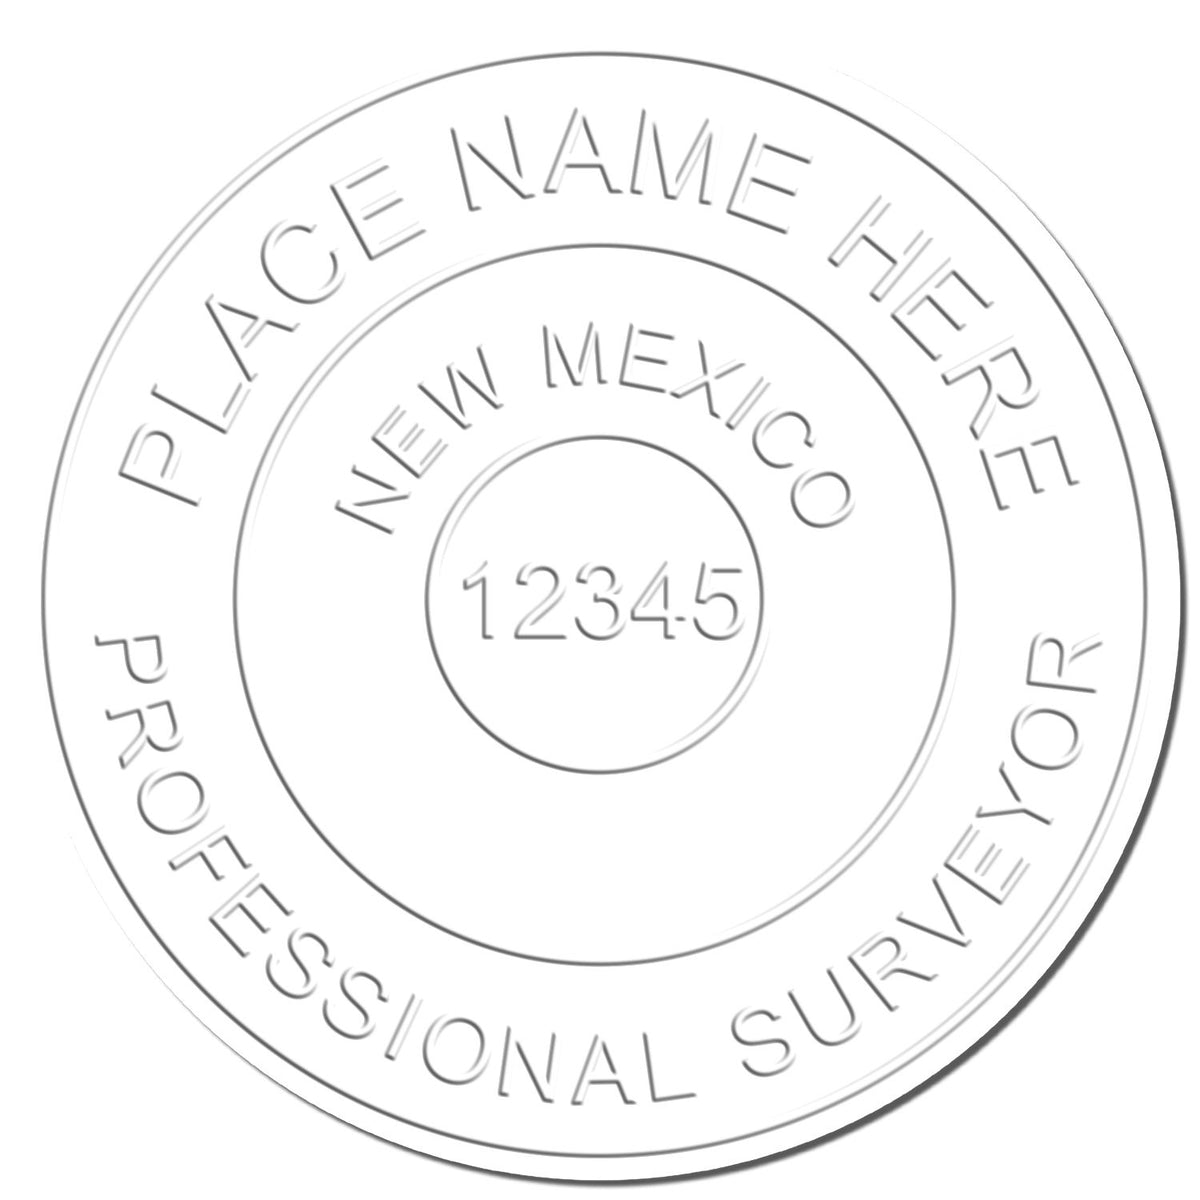 This paper is stamped with a sample imprint of the Gift New Mexico Land Surveyor Seal, signifying its quality and reliability.